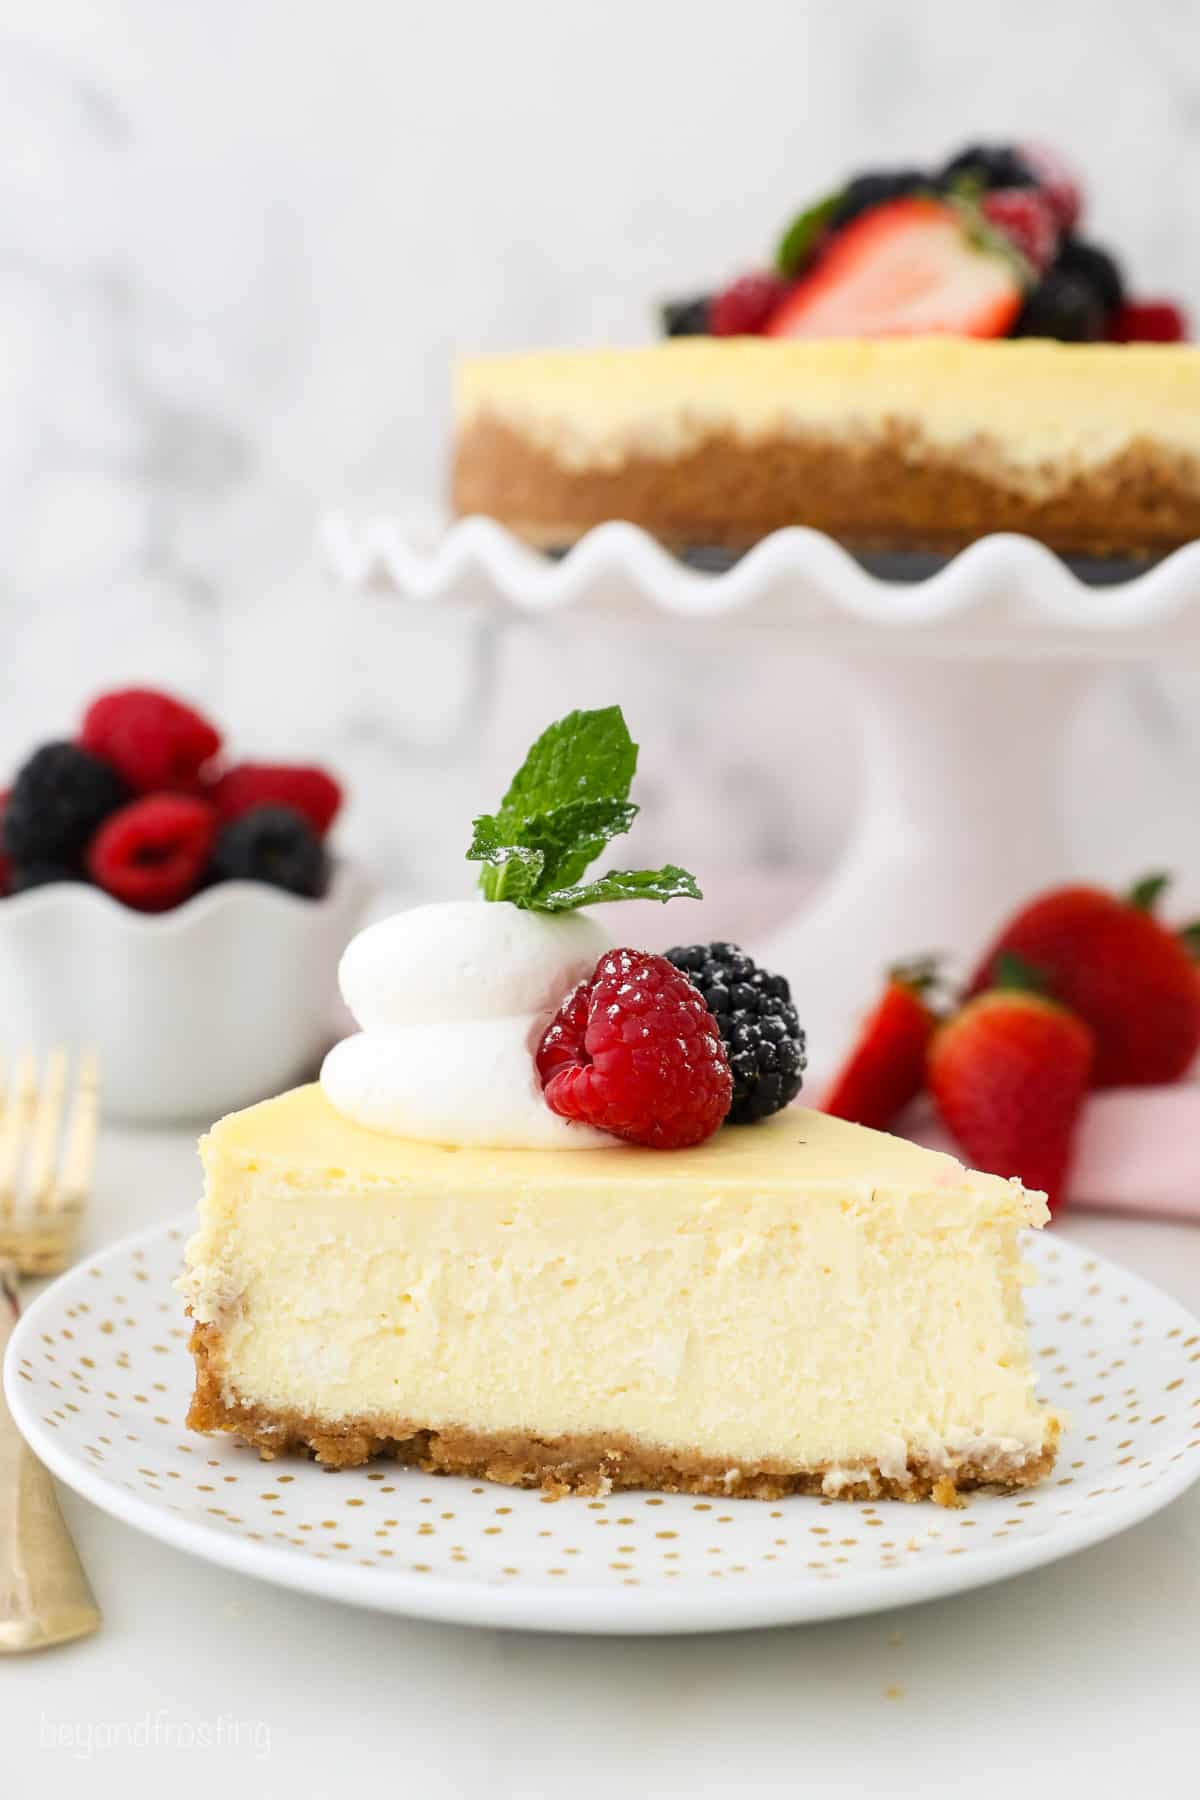 A slice of creamy cheesecake garnished with fresh berries and a swirl of whipped cream on a white plate, with the rest of the cheesecake on a cake stand in the background.